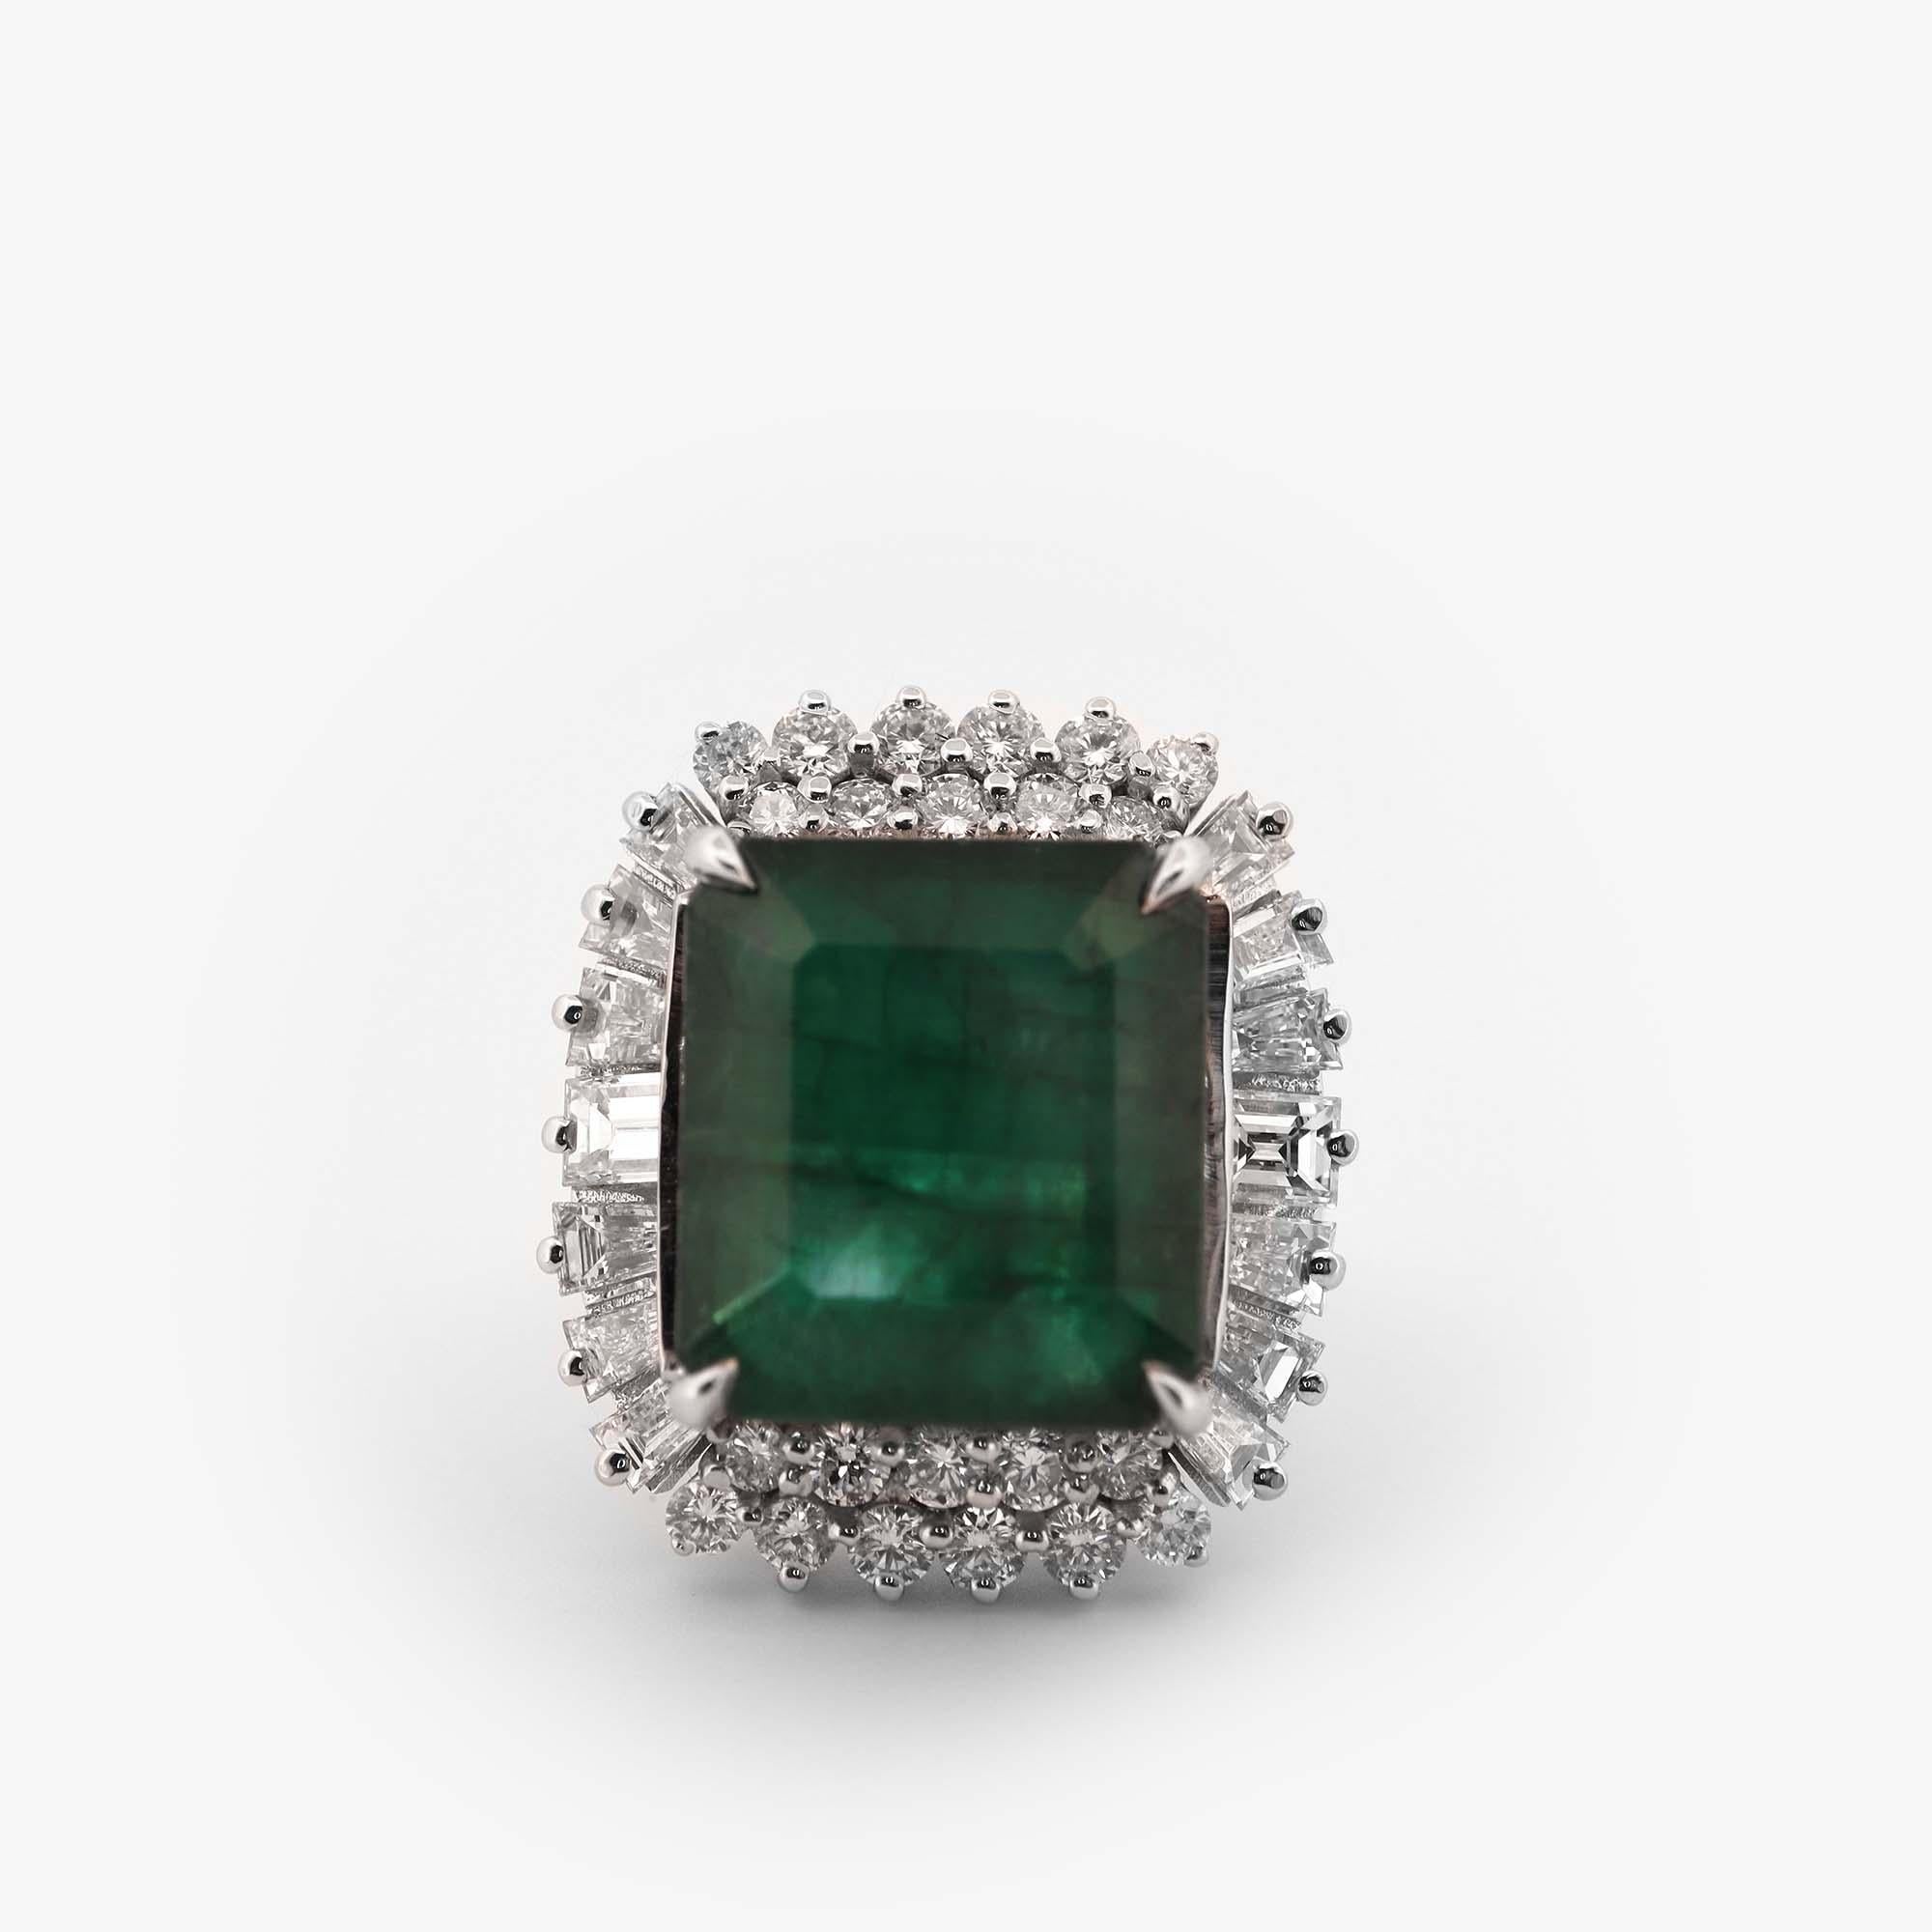 Experience the pure beauty and radiance of our exquisite 14.5 ct emerald and diamond ring, set in 14kt white gold. Crafted with the finest attention to detail, this ring is the perfect choice for anyone who appreciates the beauty and elegance of